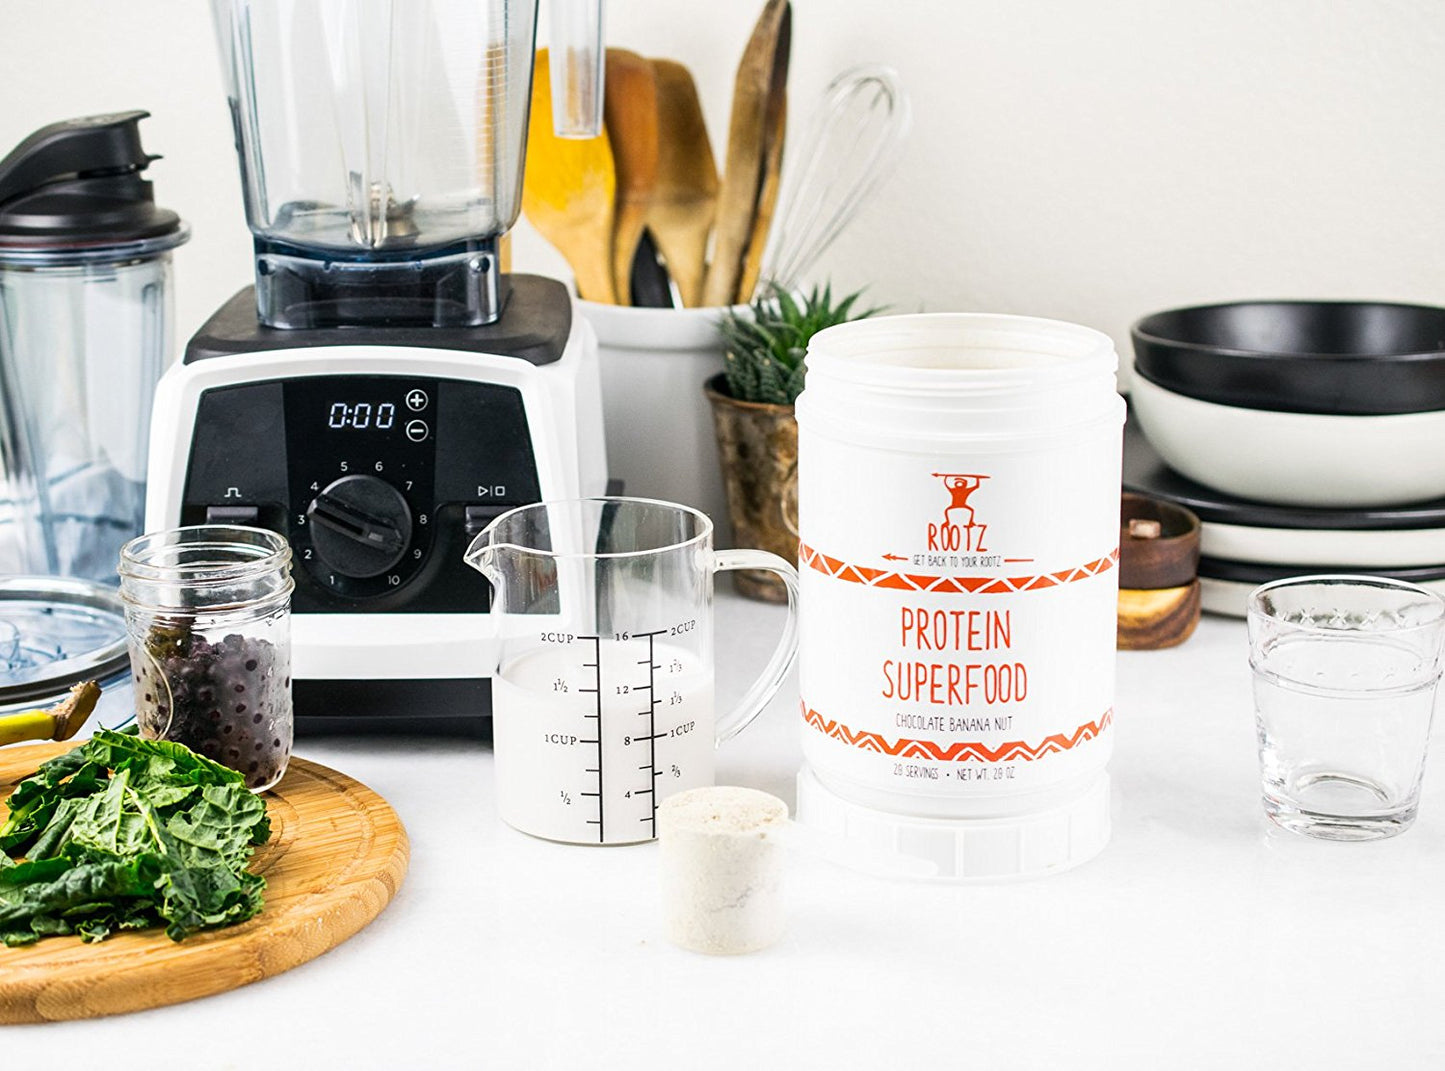 Protein Superfood x 1 - Special Offer